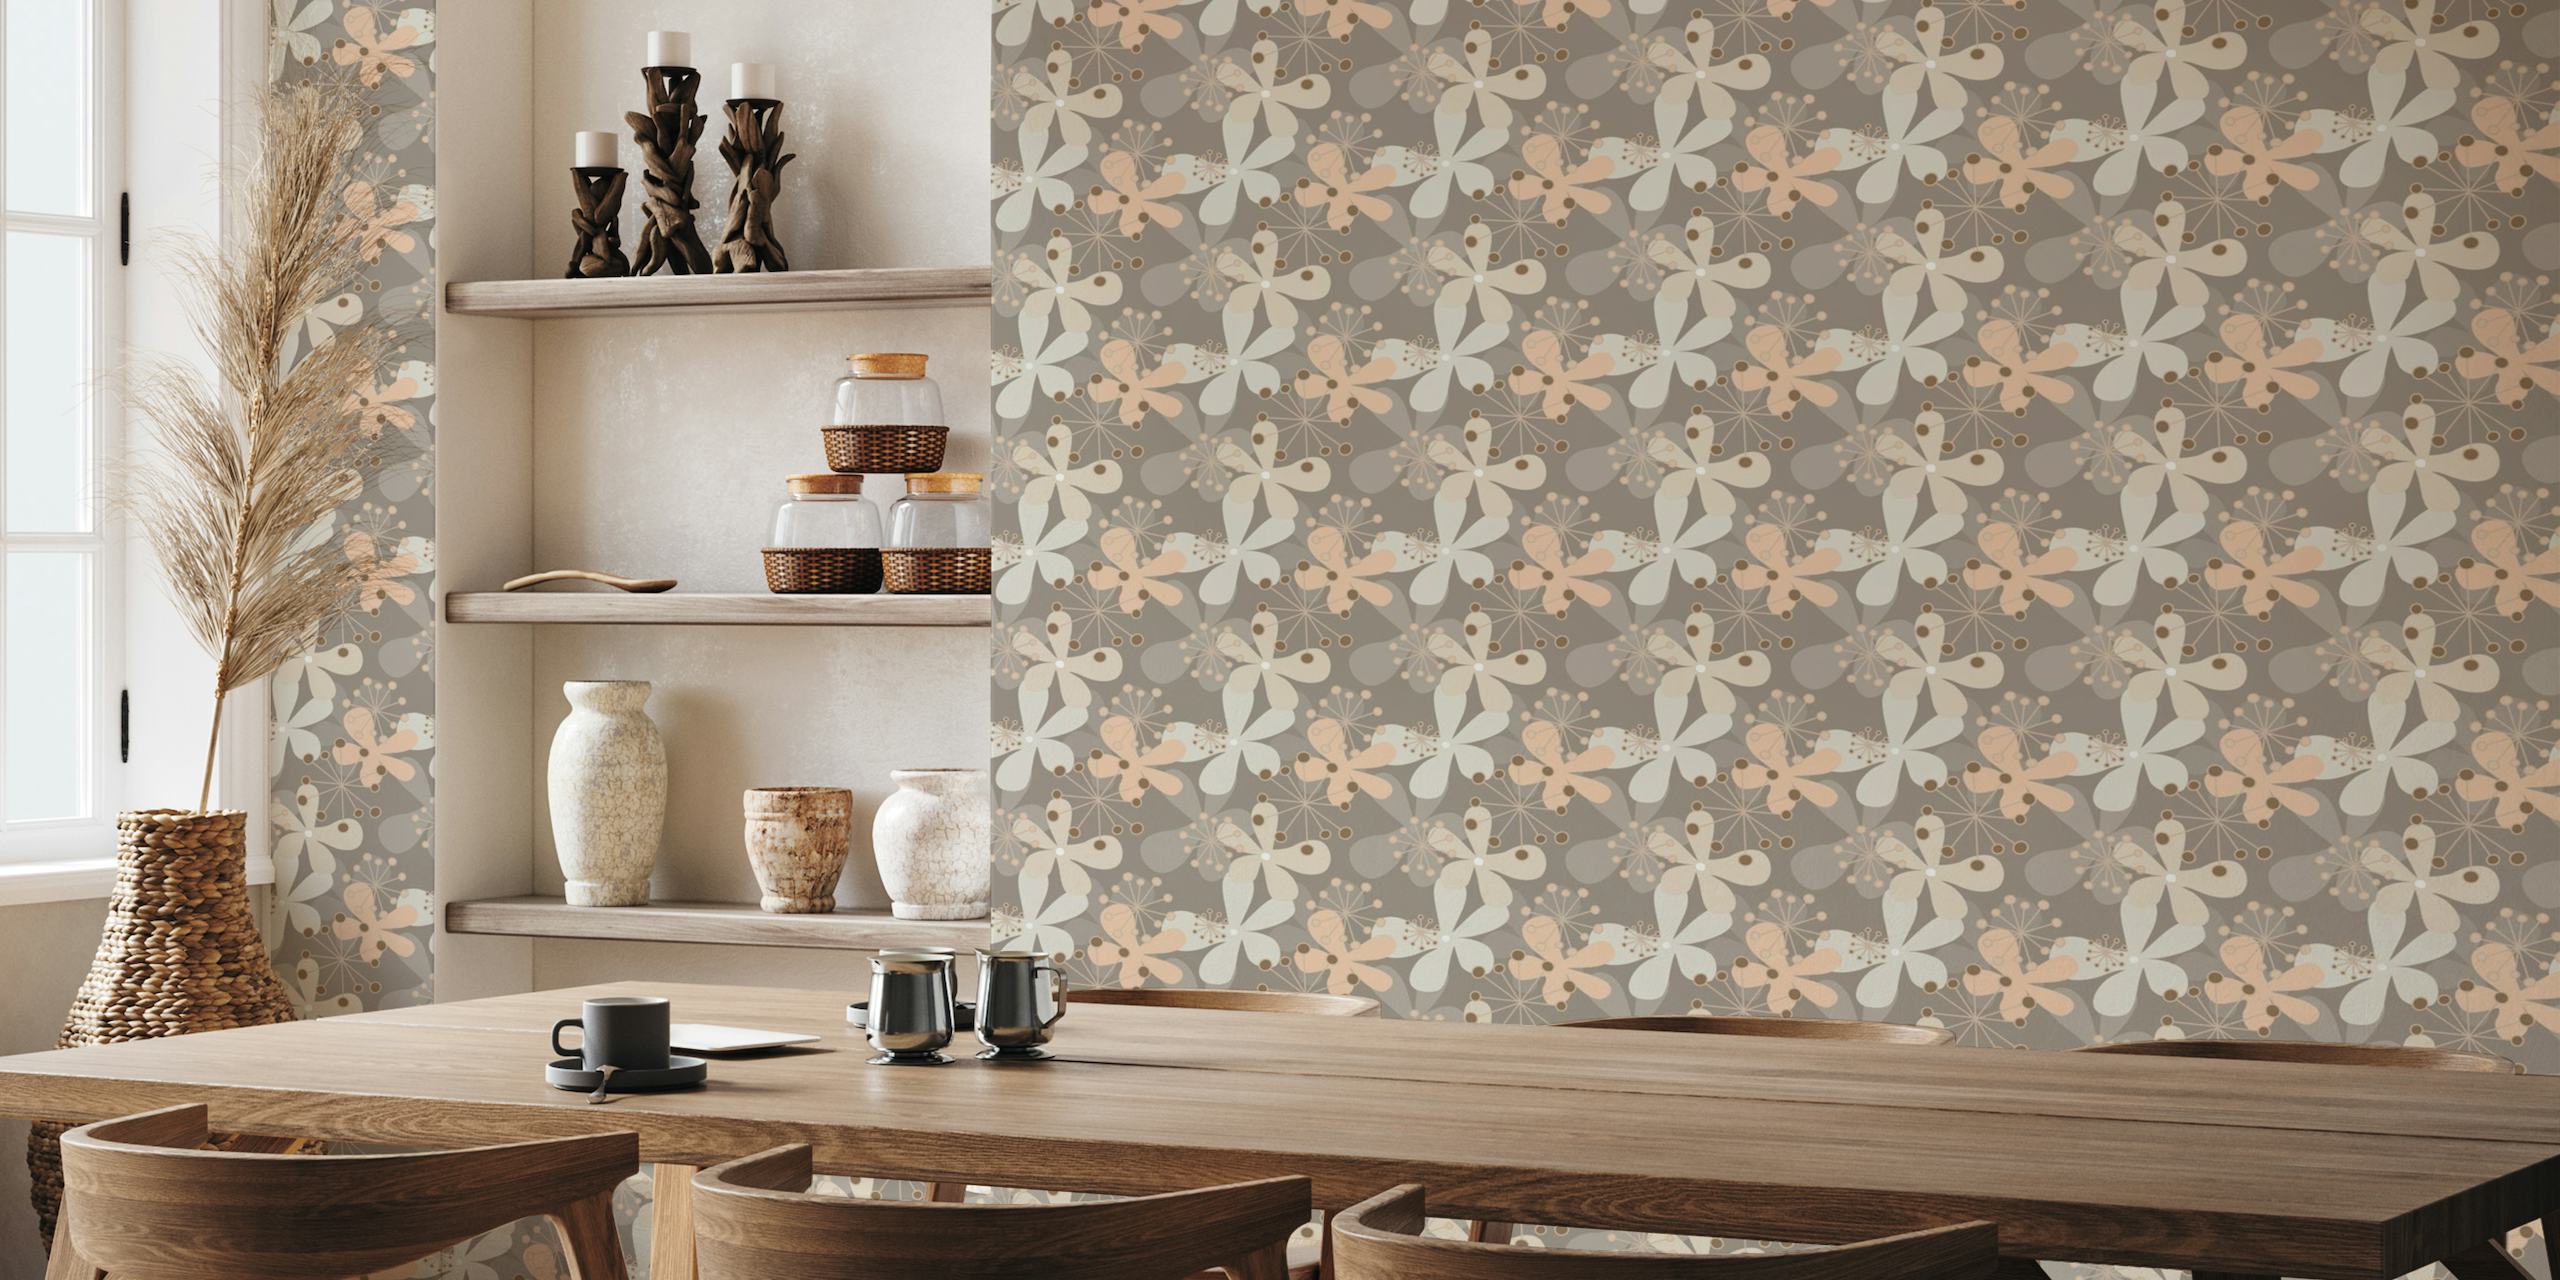 Midcentury Blooms Beige wall mural with stylized floral patterns and geometric accents in beige tones